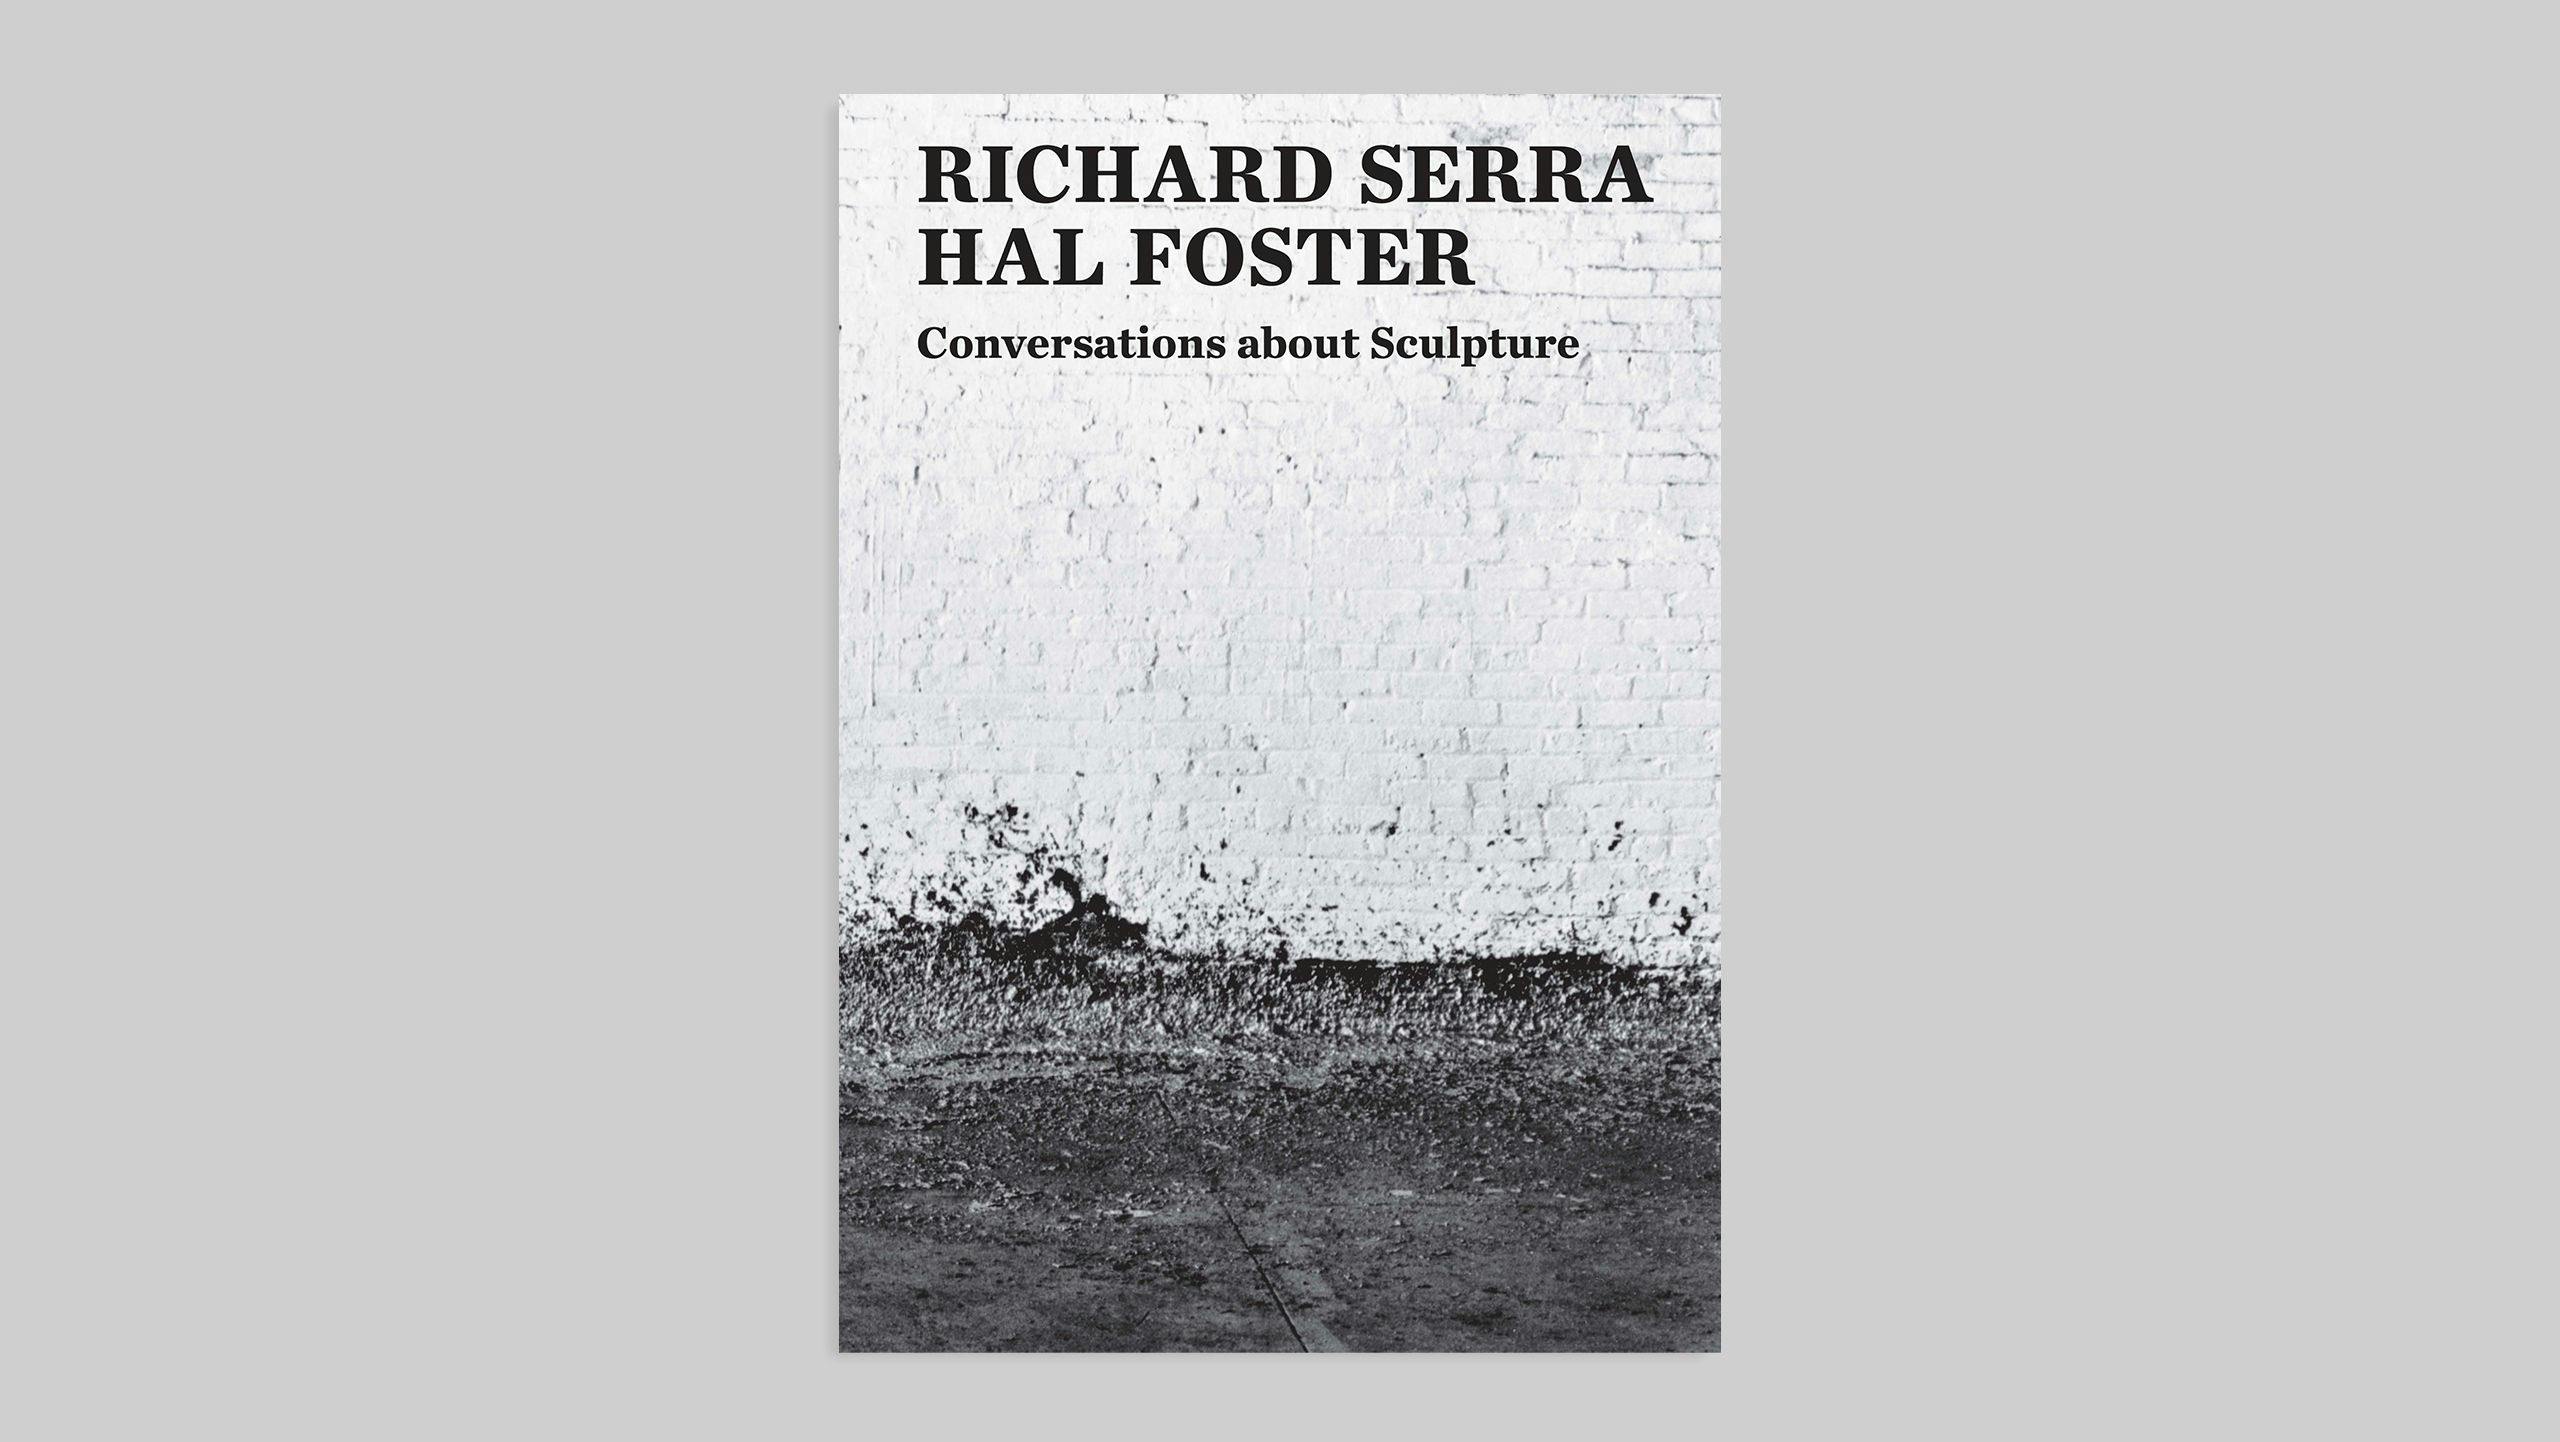 Cover of a book titled Hal Foster and Richard Serra: Conversations about Sculpture published by Yale University Press in 2018.